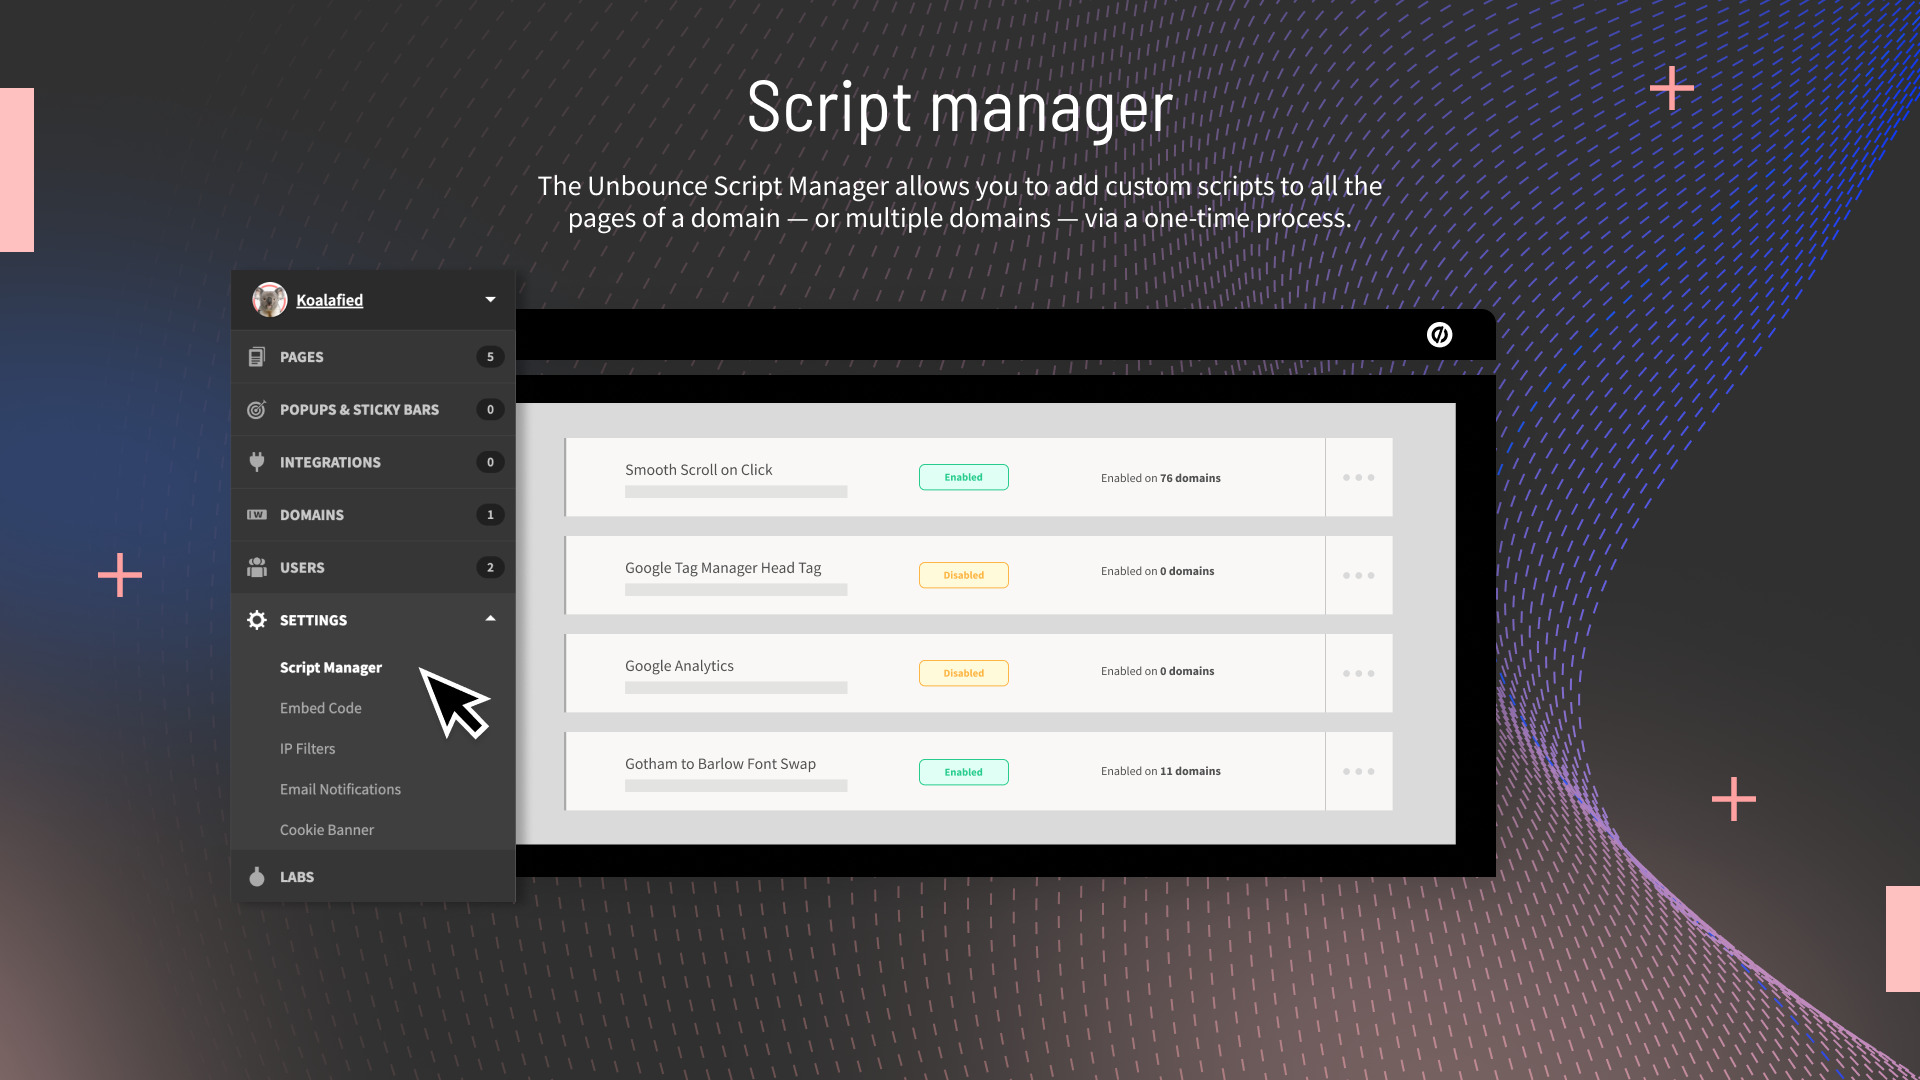 The Unbounce Script Manager allows you to add custom scripts to all the pages of a domain—or multiple domains—via a one-time process.